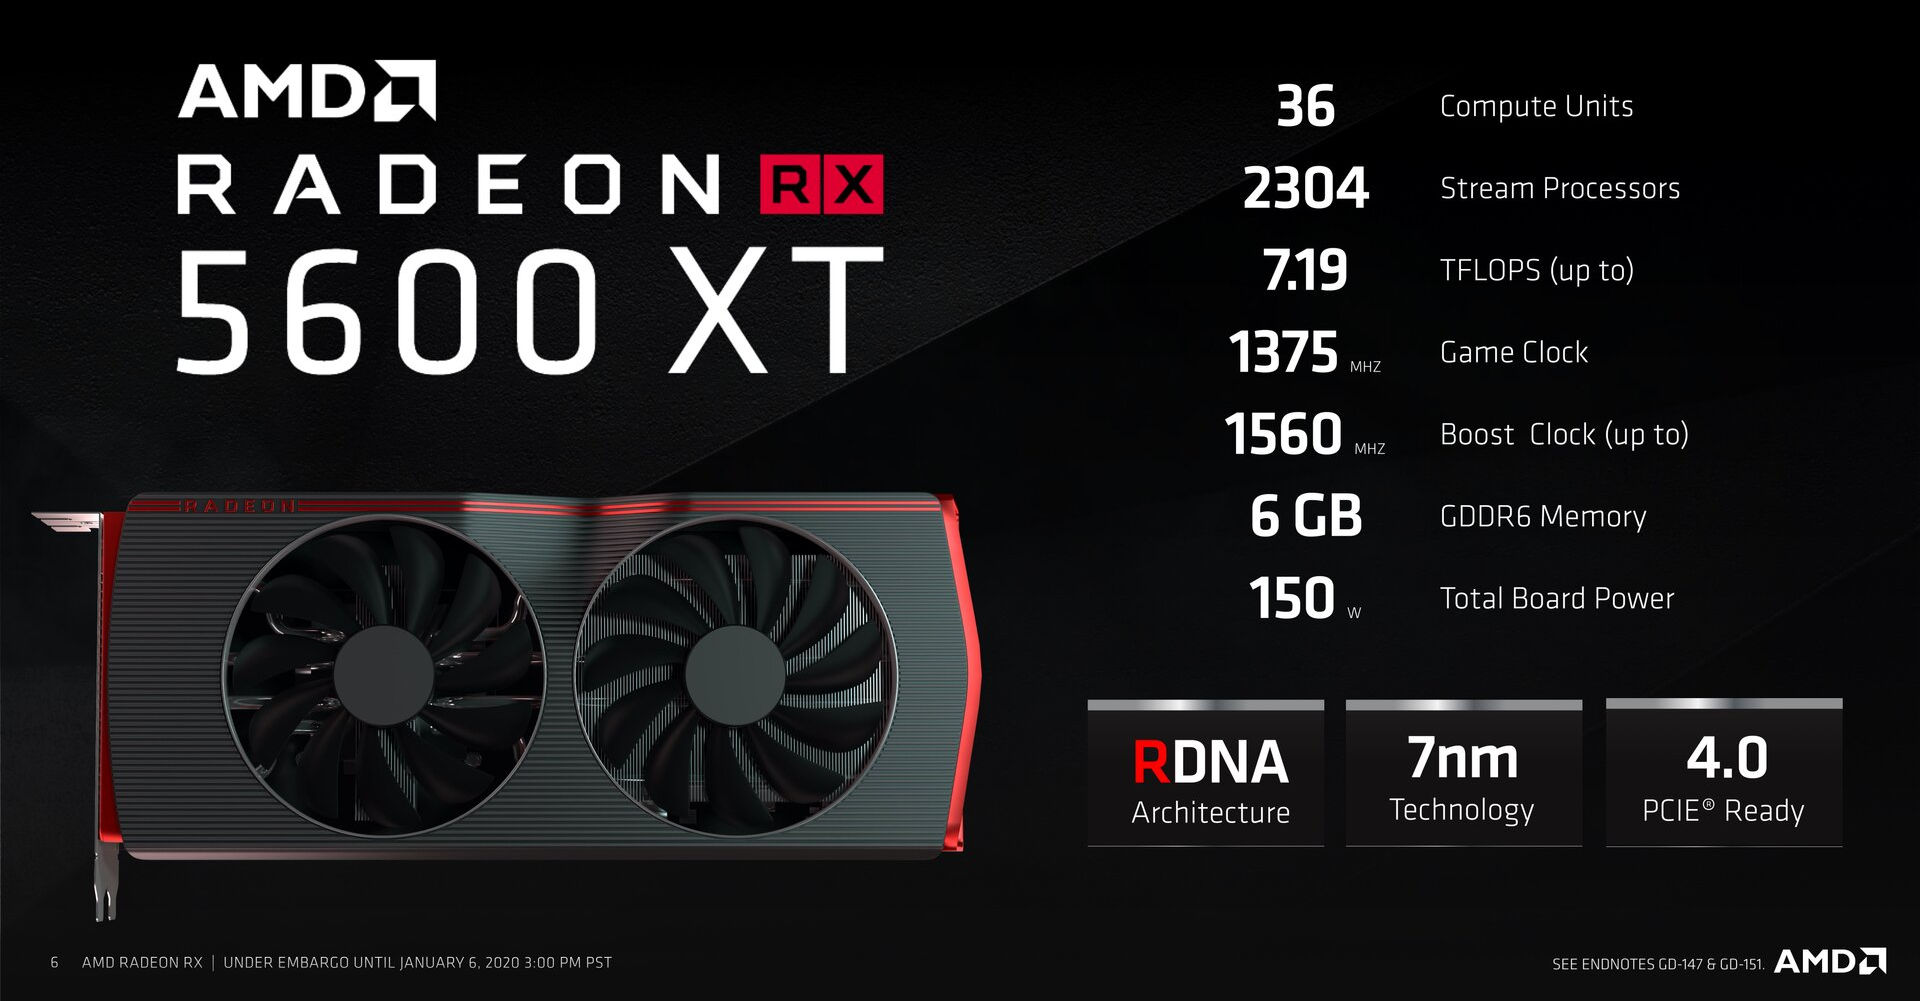 AMD introduces Radeon RX 5600 XT for 